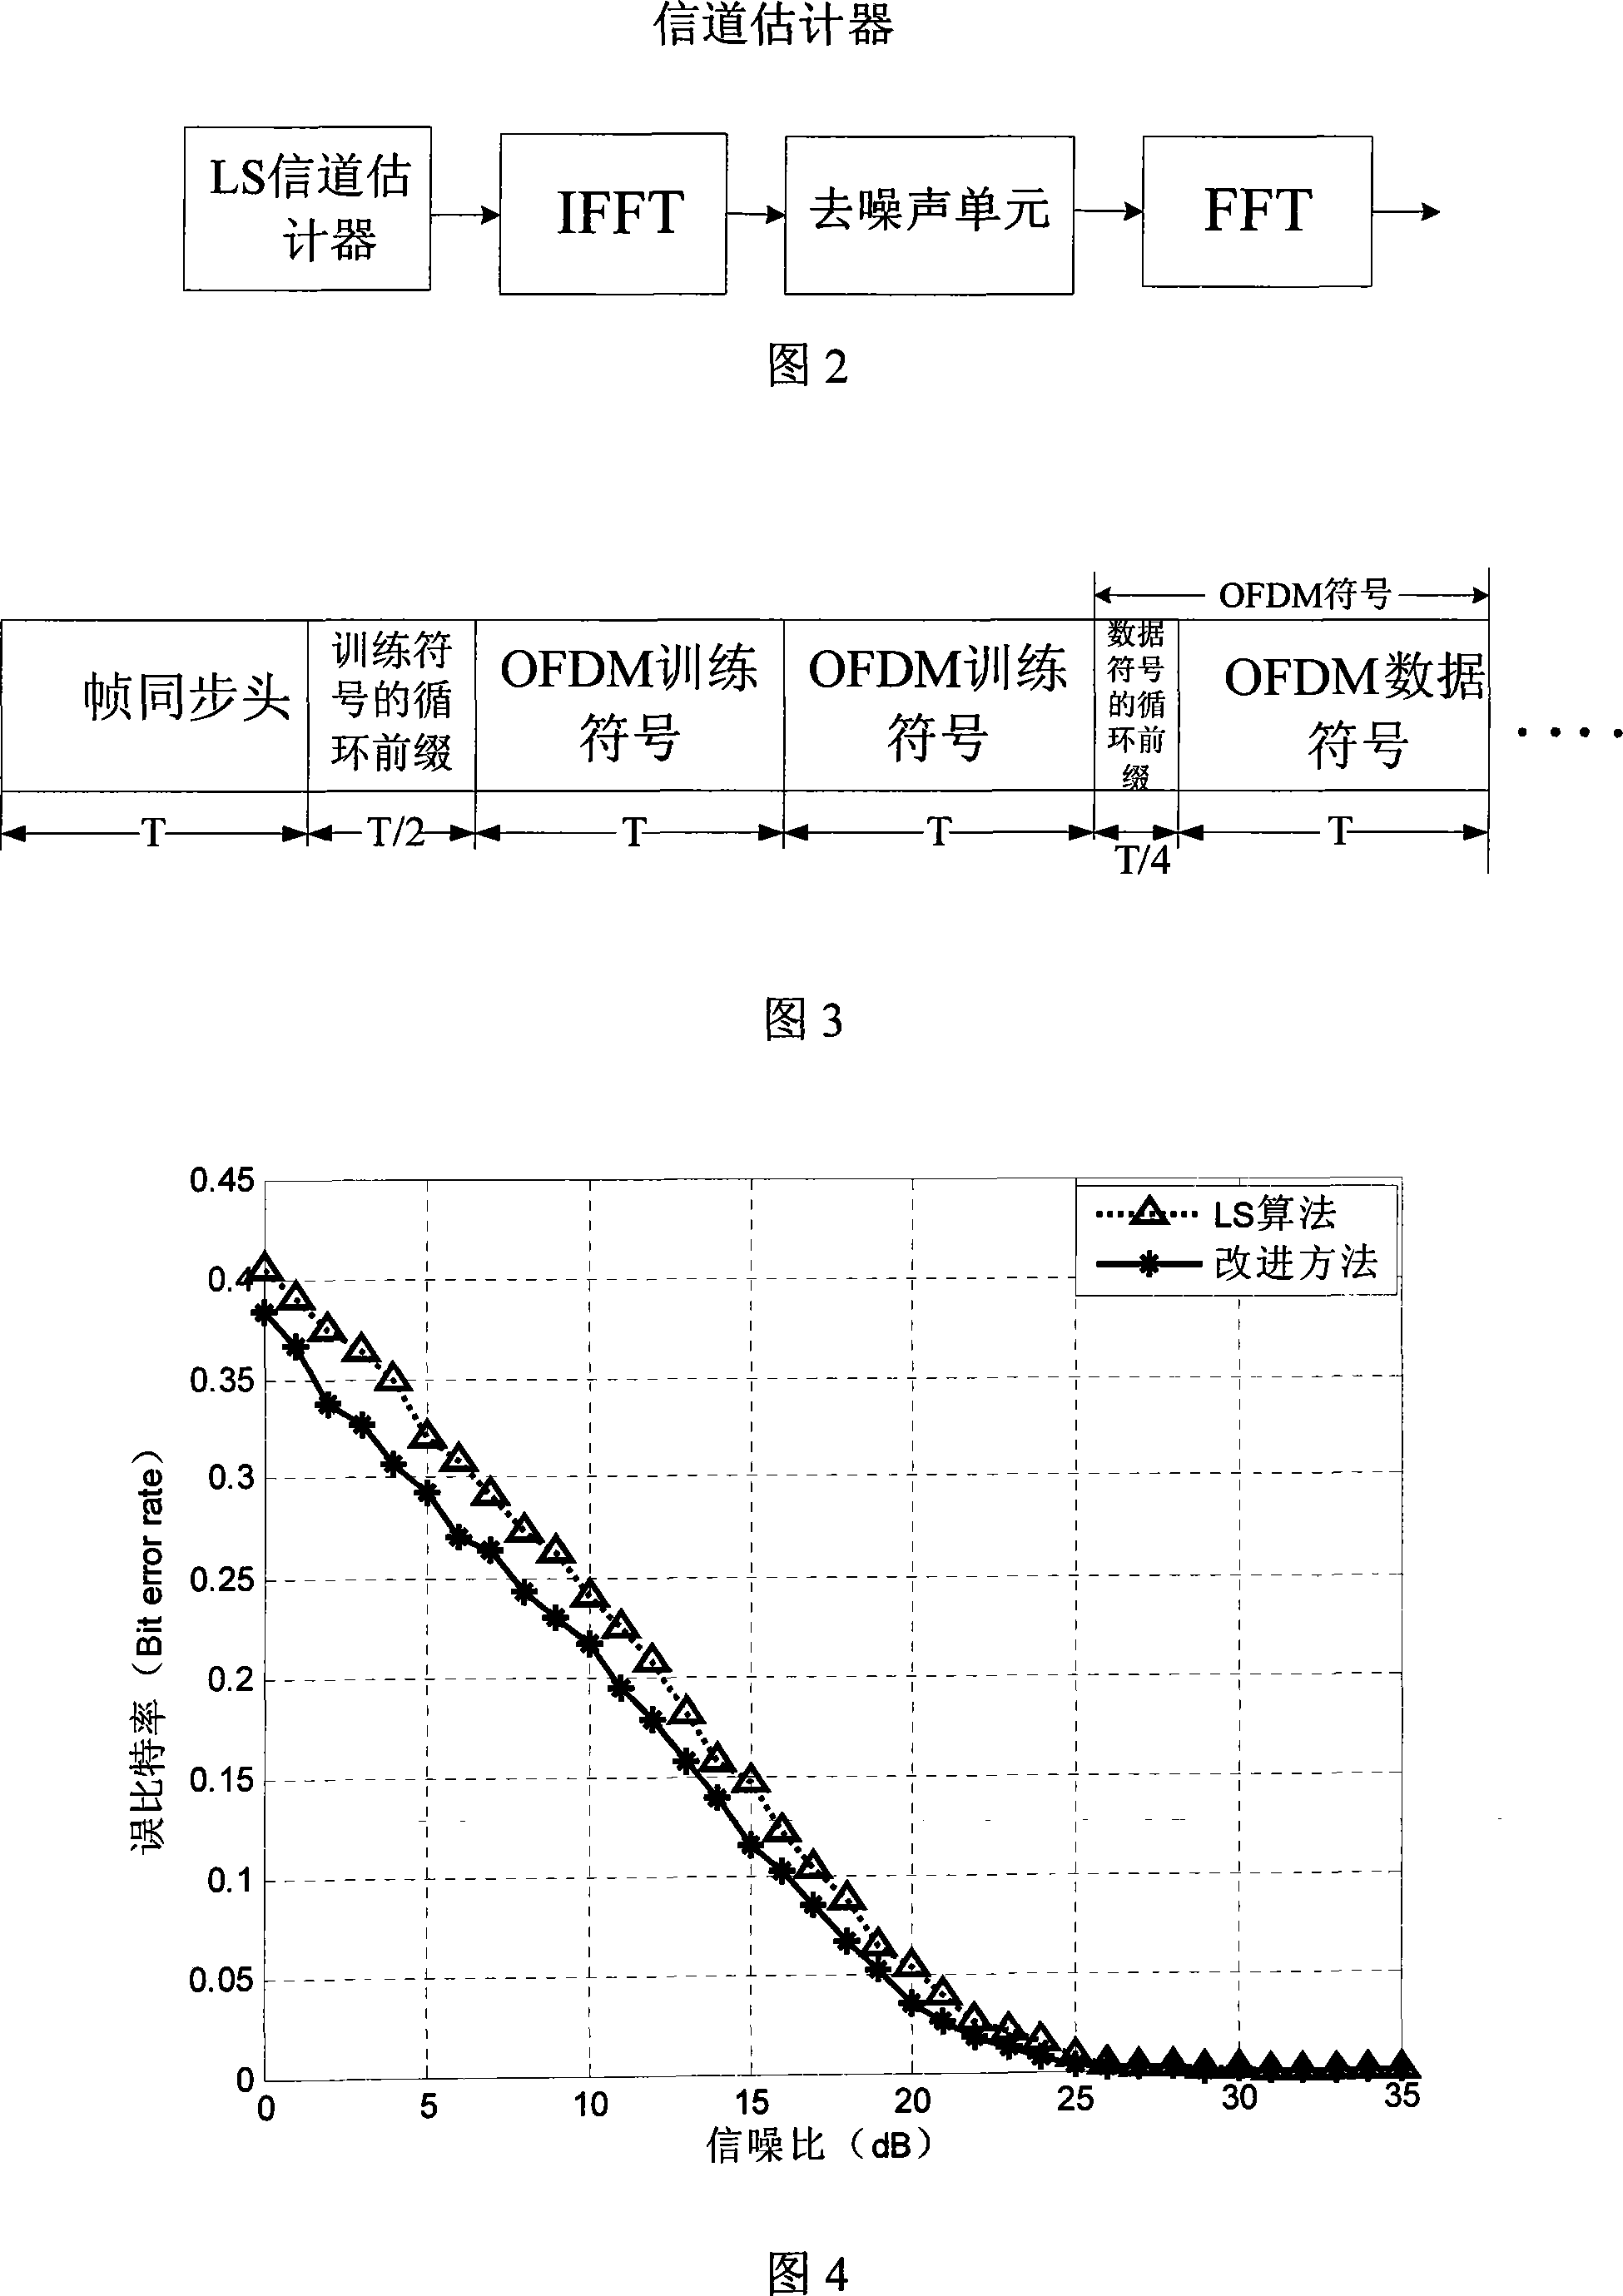 Modified type LS channel estimation method for OFDM system